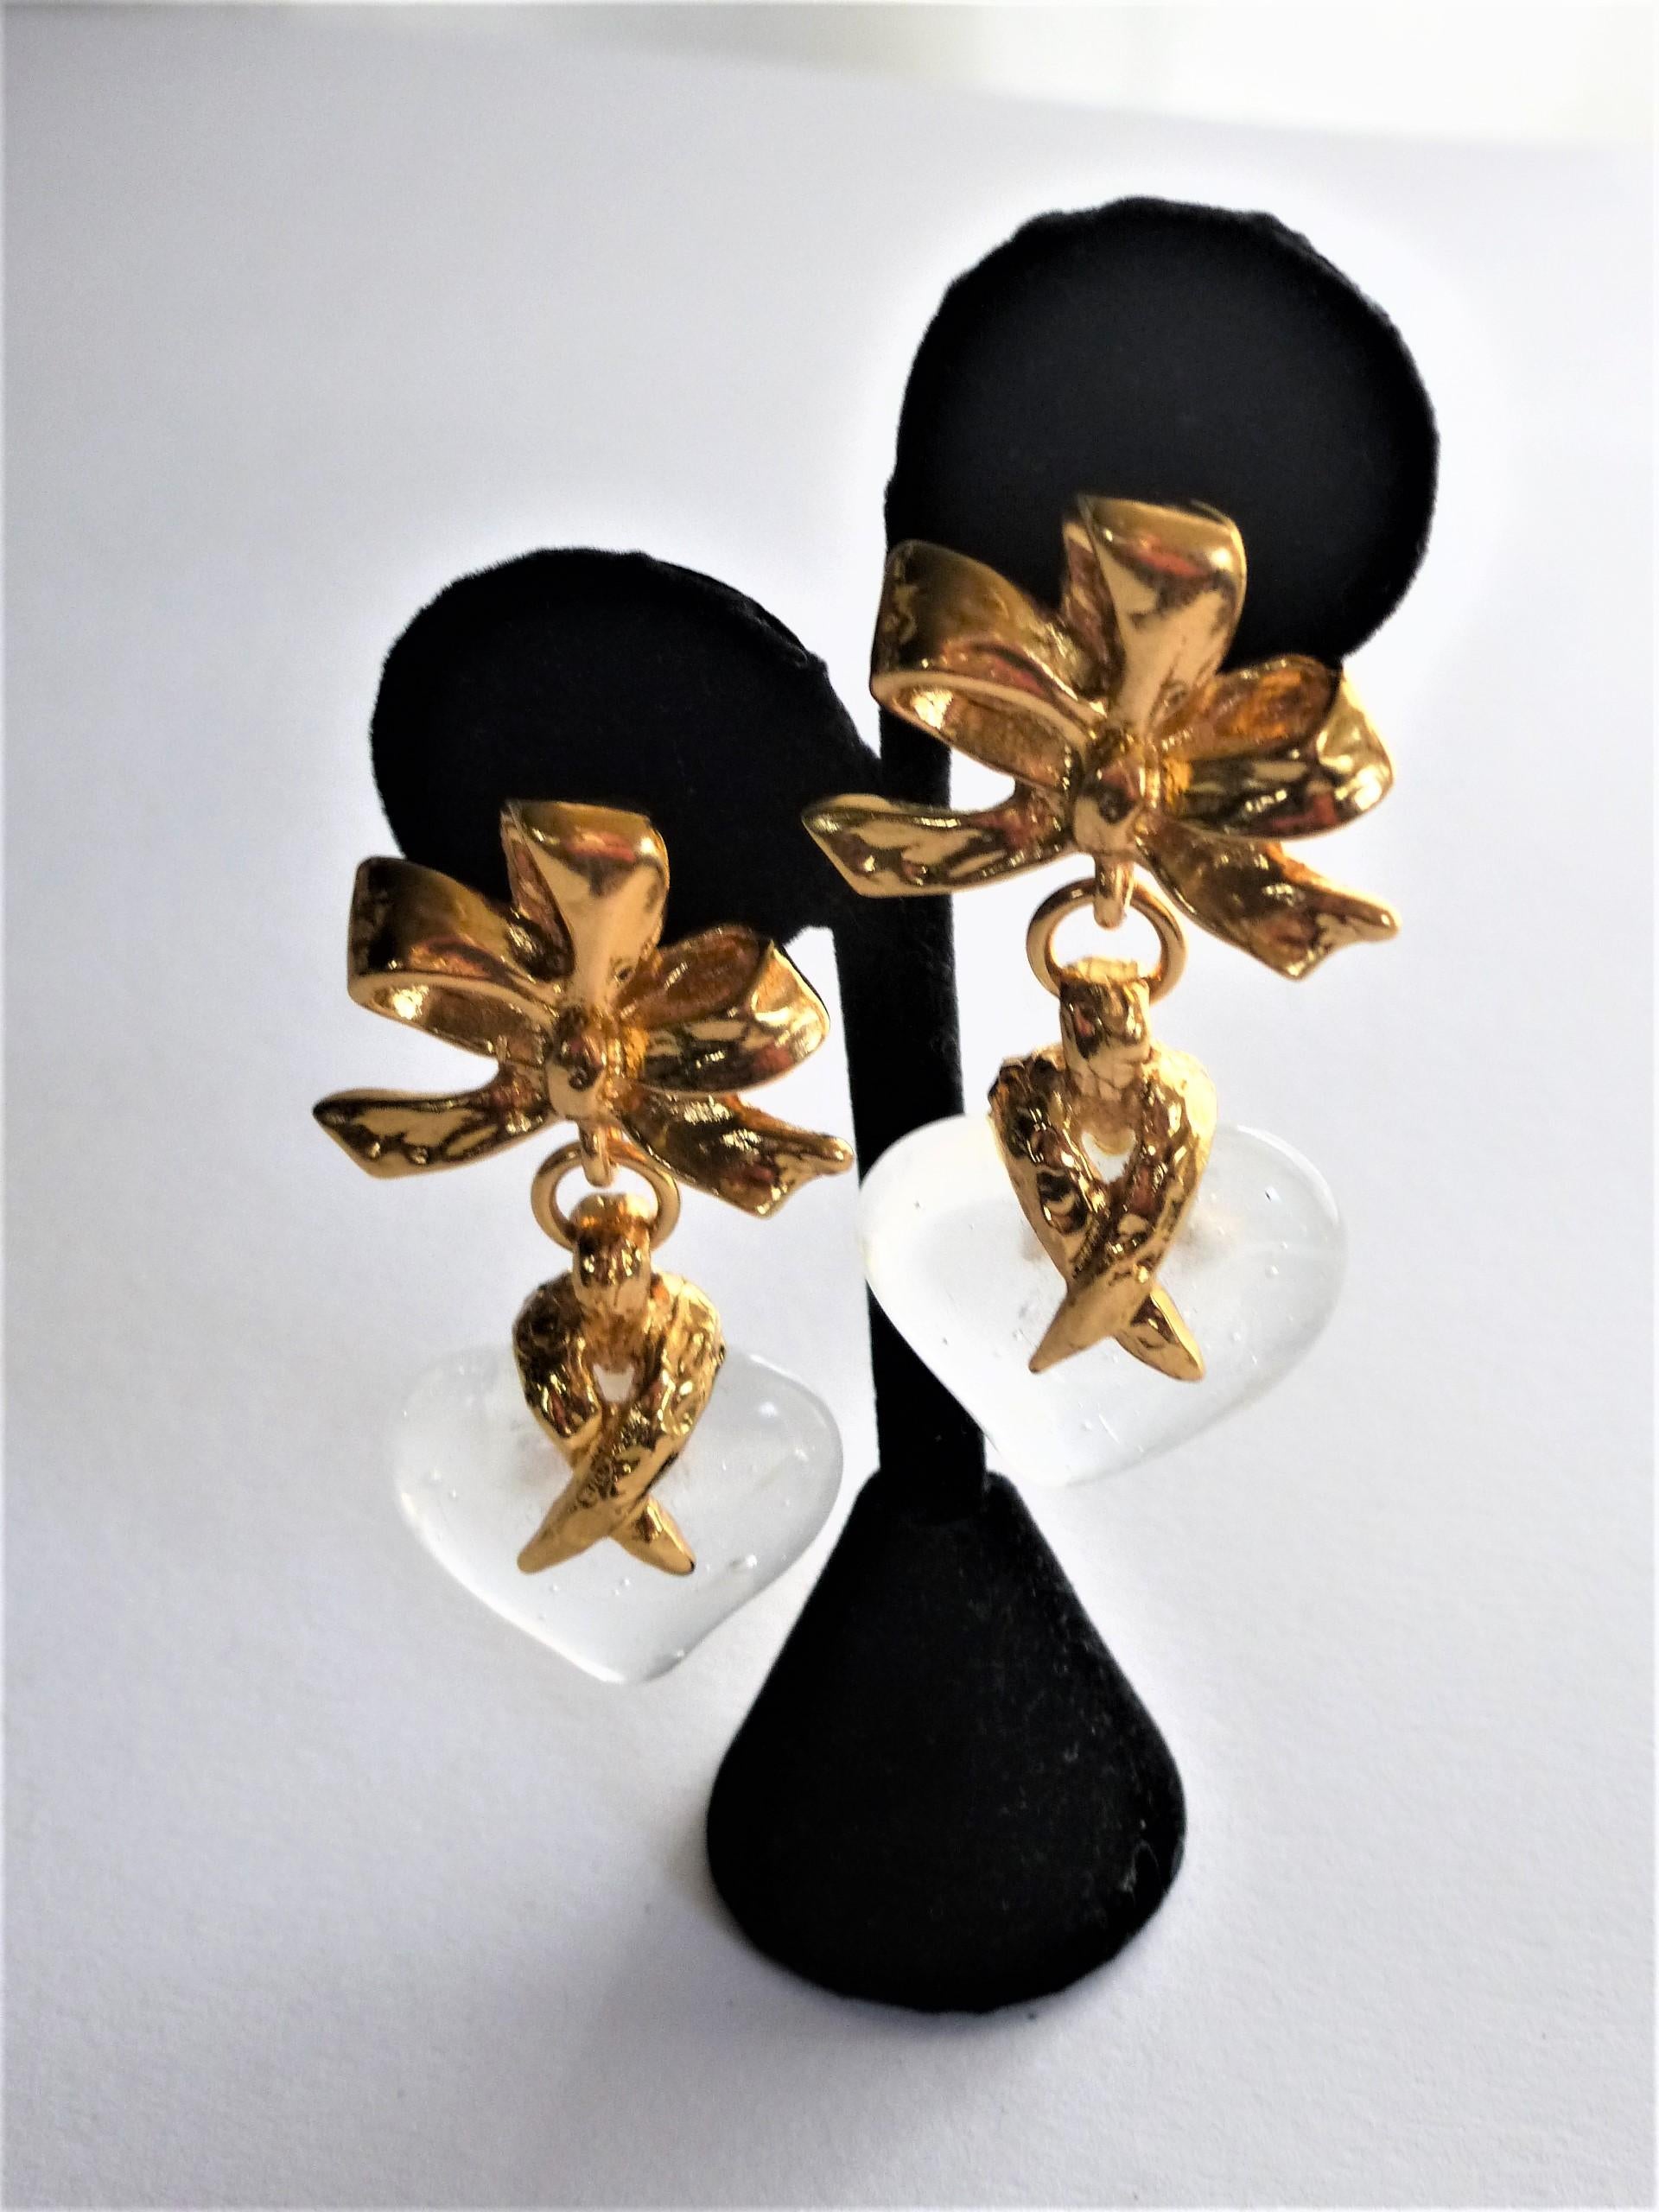 Heart Cut Heart ear clip by Yves St. Laurent 80's gold plated